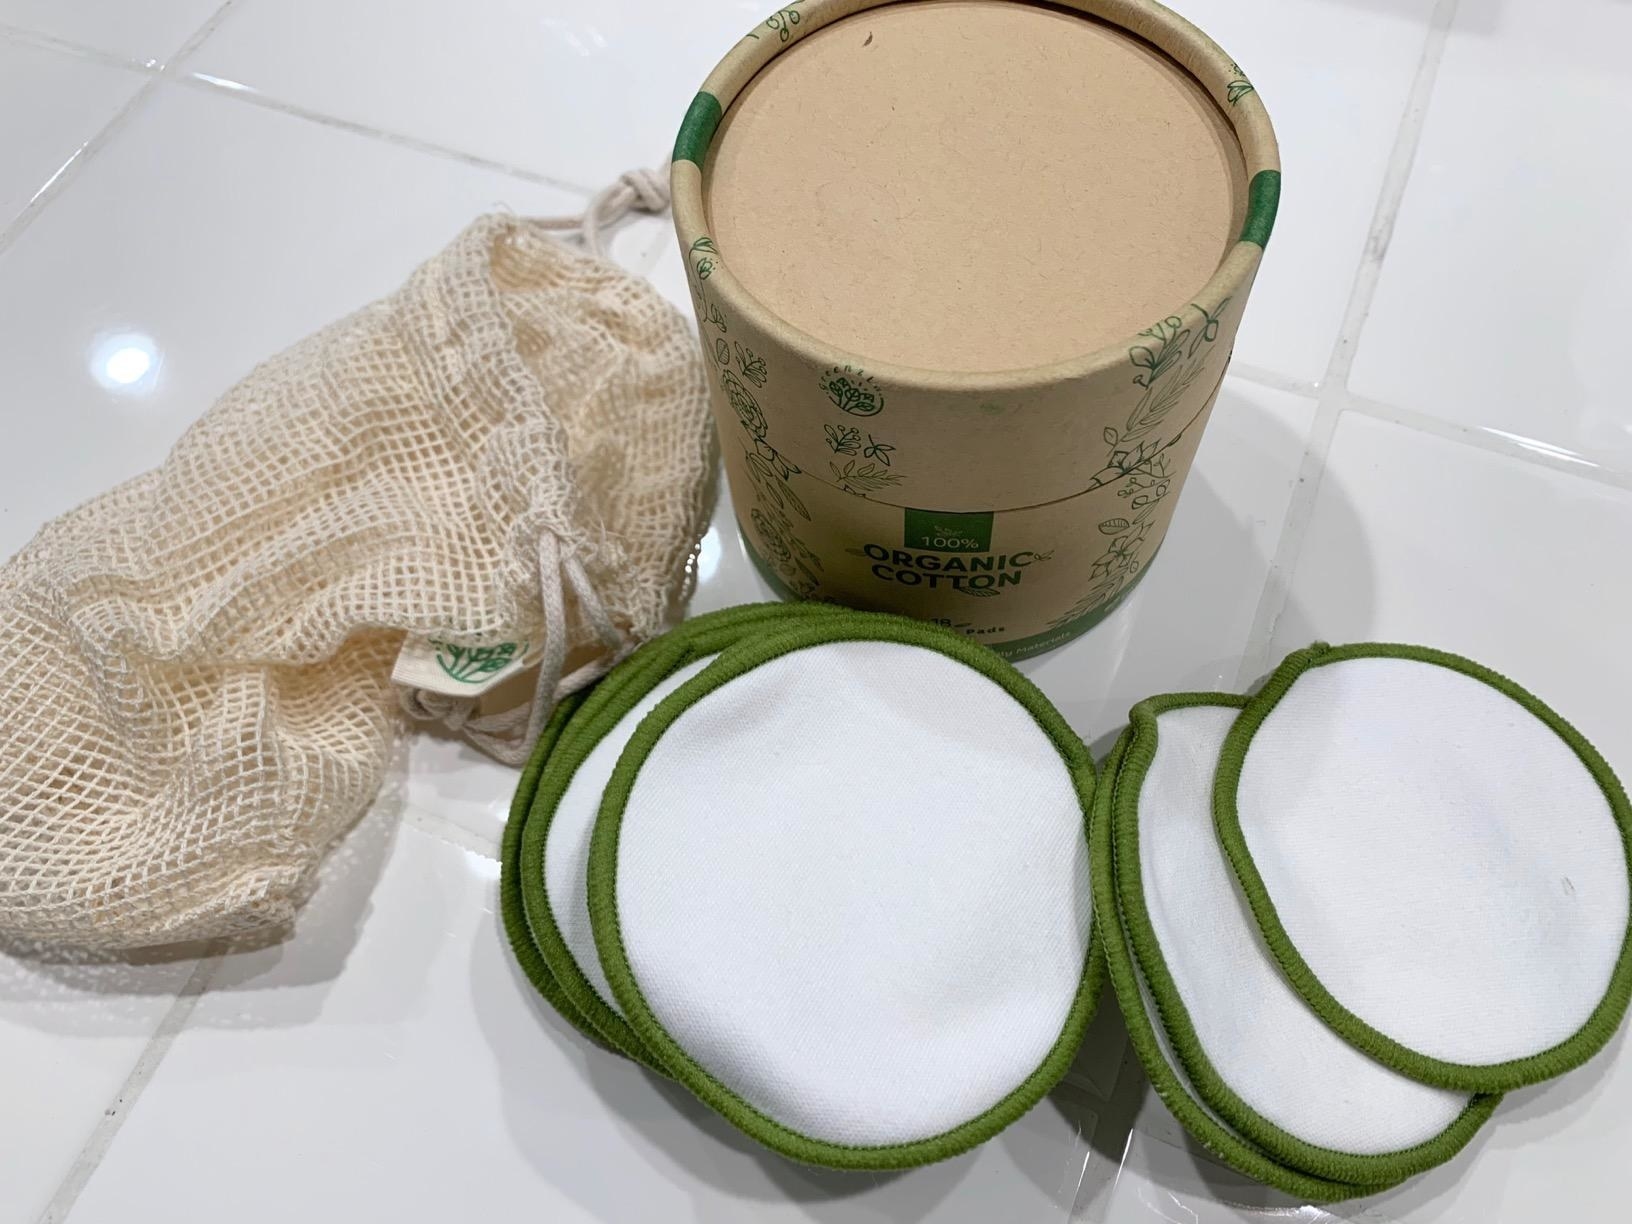 Reviewer image of makeup remover pads and packaging